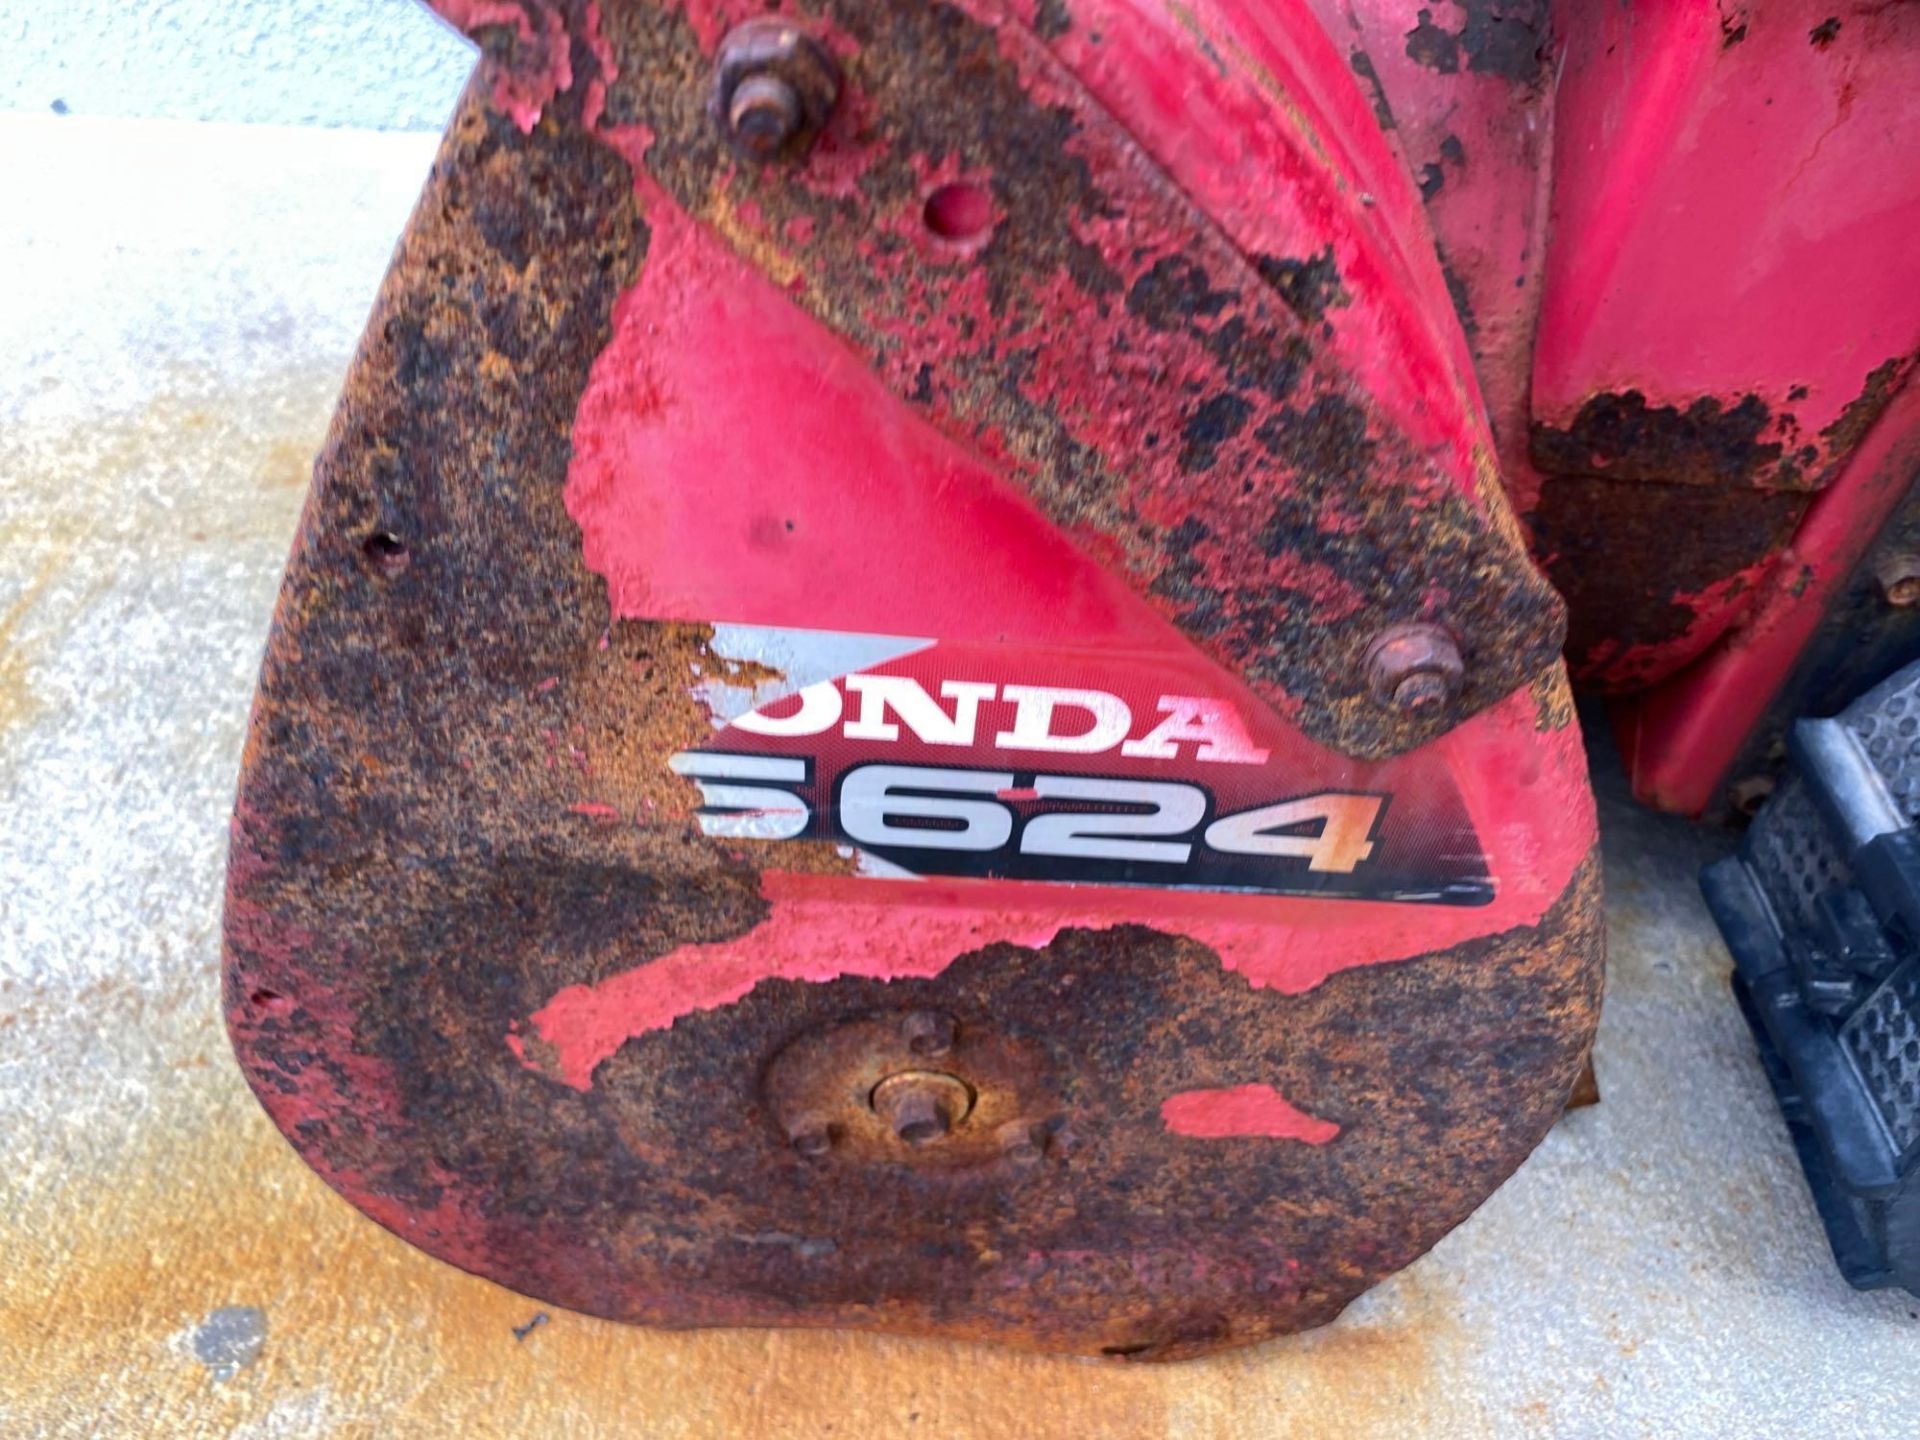 Honda Hydrostatic?24in. Tracked Snow Thrower - Image 2 of 4